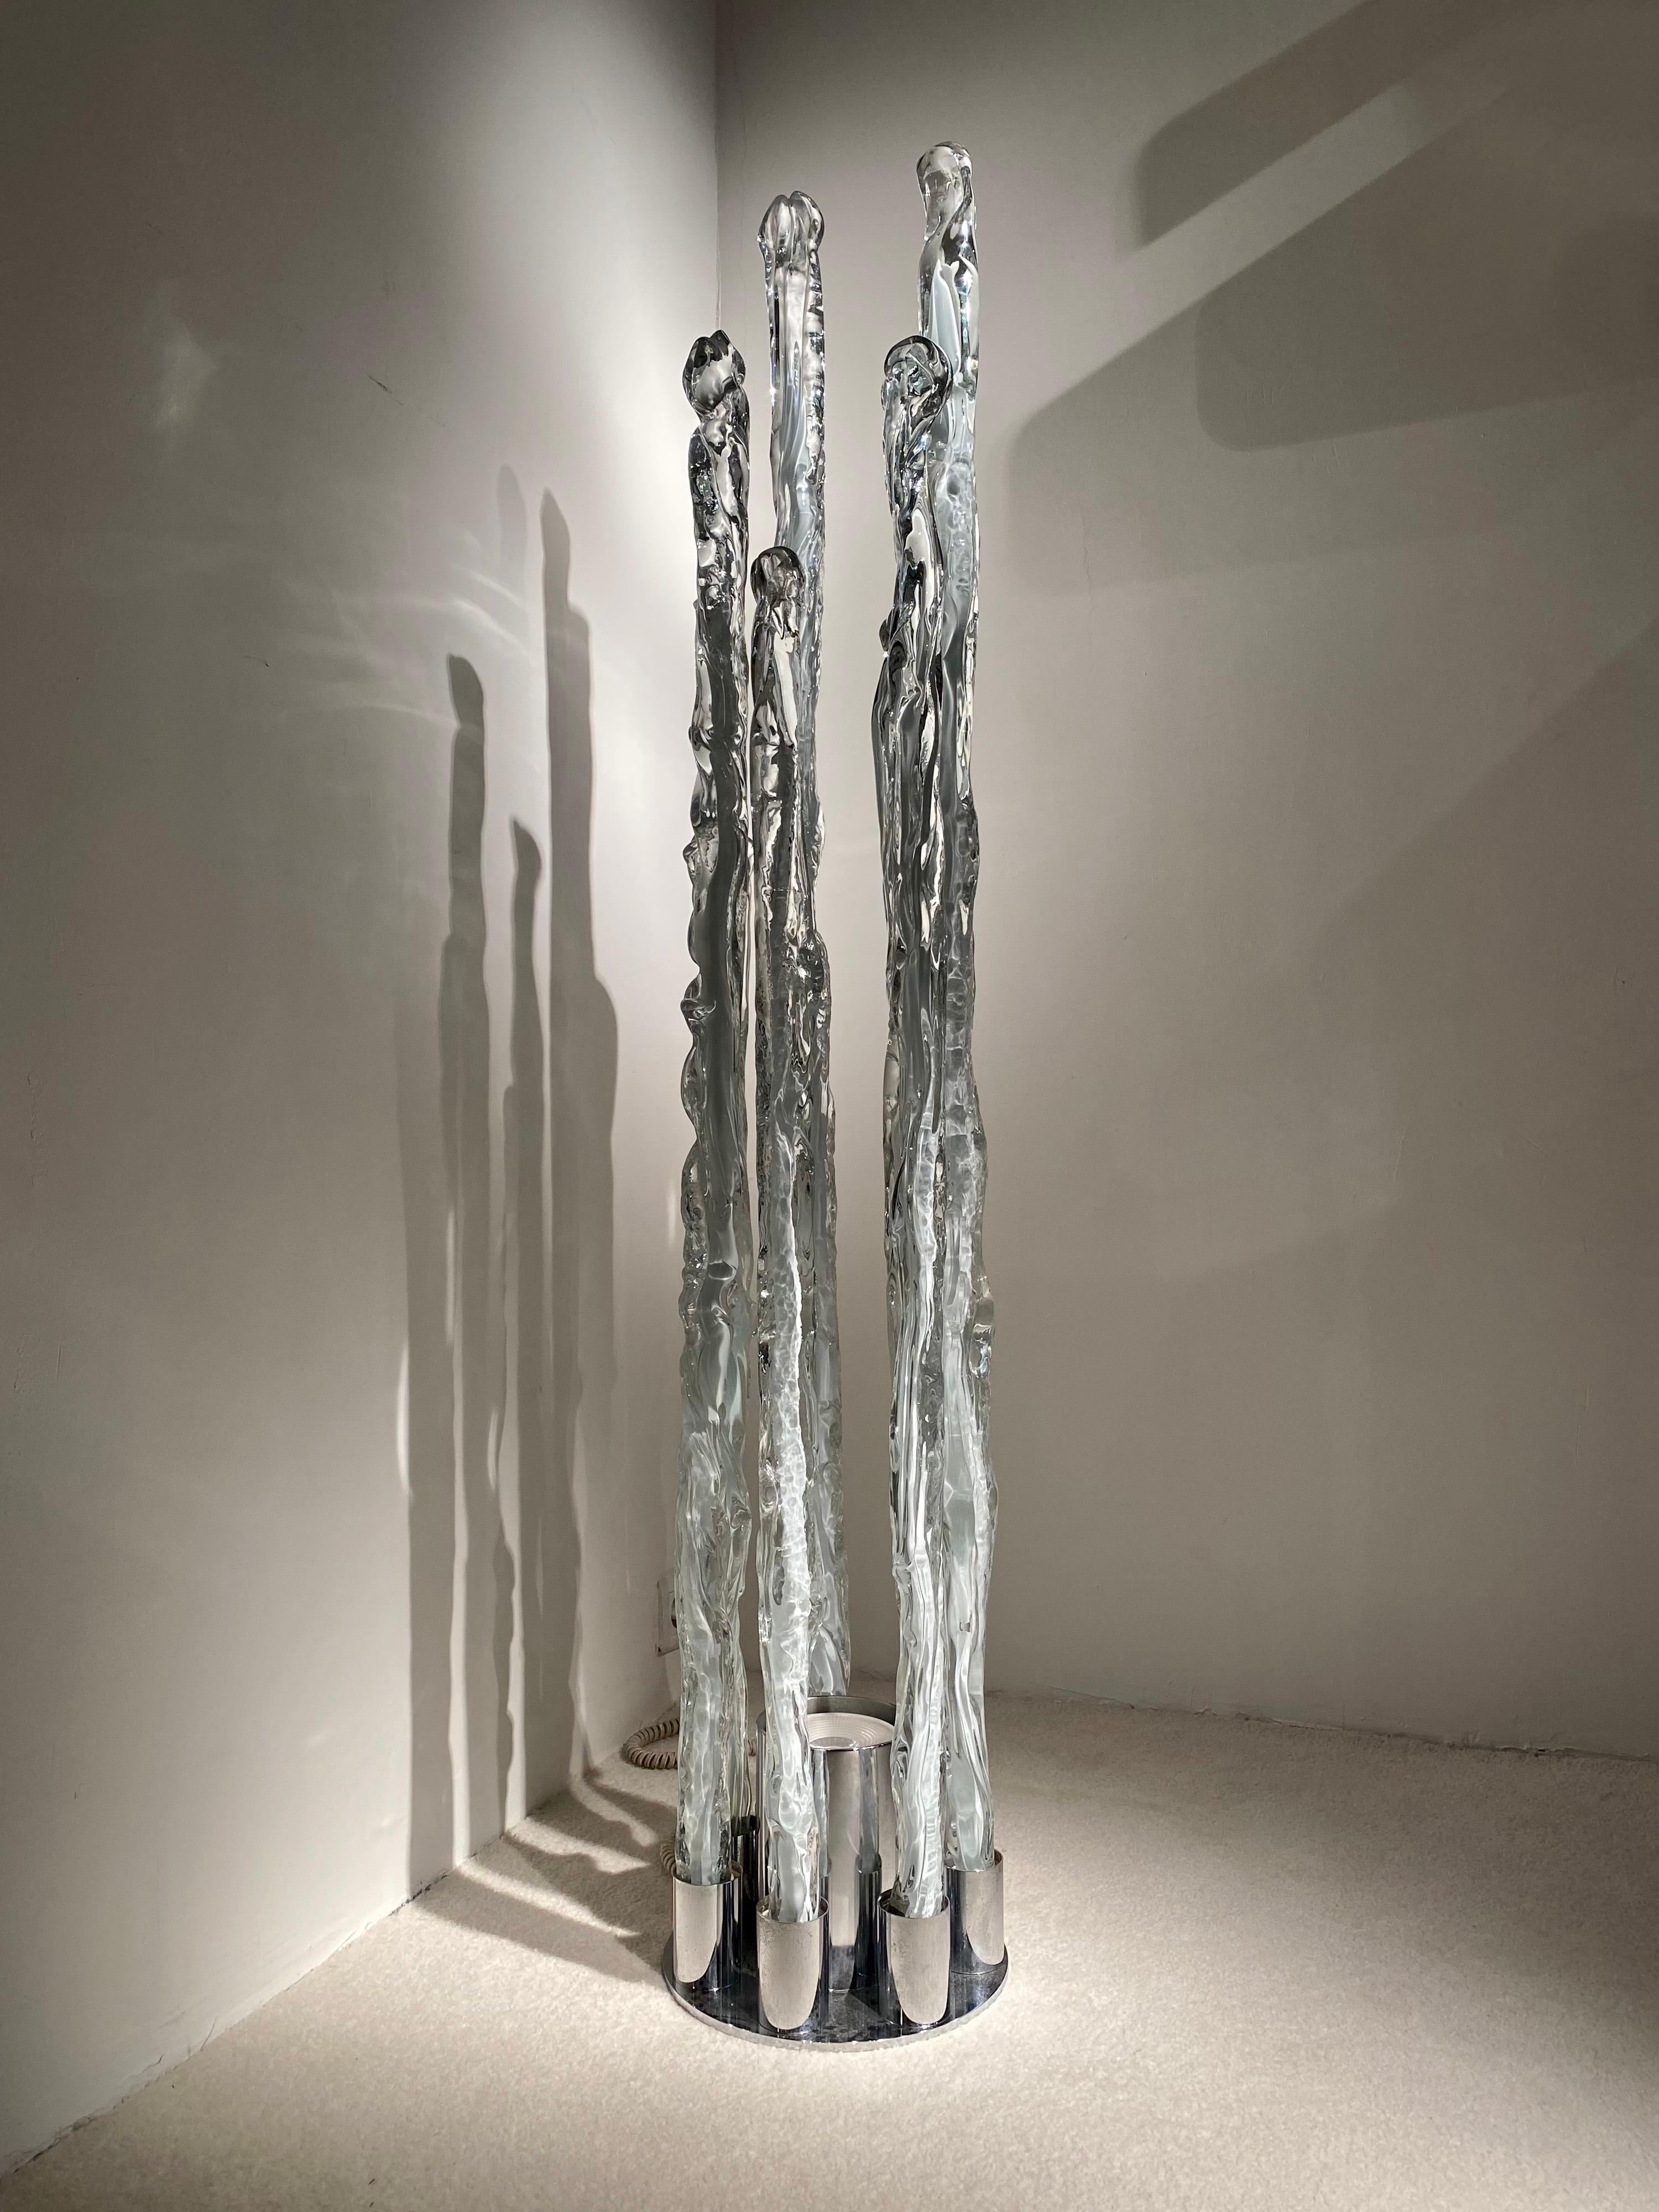 Sculpural Floor Lamp in blown glass of  Murano and a base in chromed metal.
Designed by Ettore Fantasia and Gino Poli for Sothis, interesting work of blown glass that gives it the appearance of ice.
The intensity of the light is variable with the